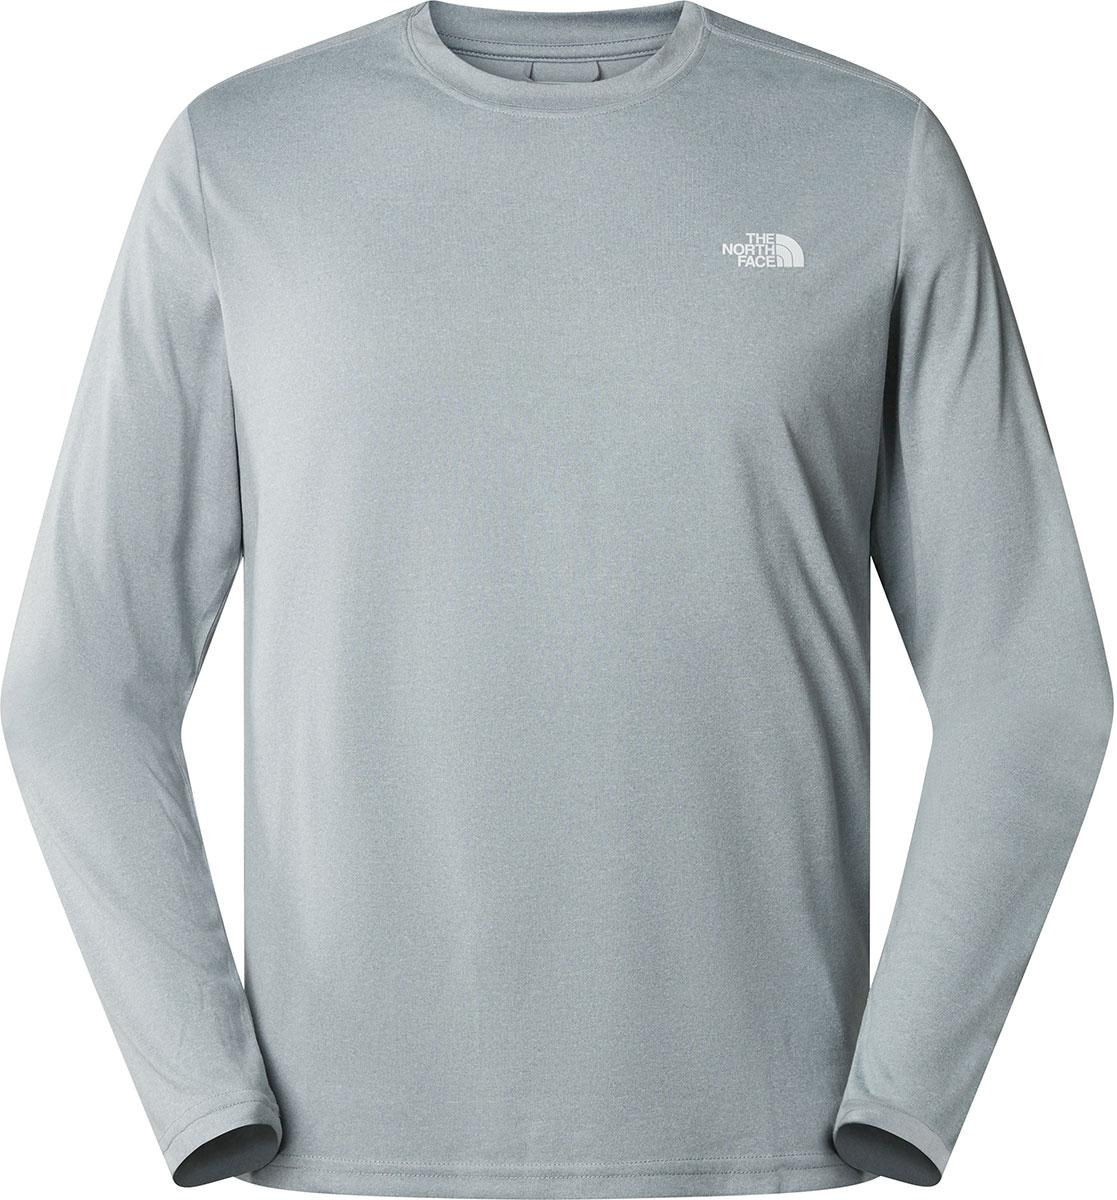 The North Face Reaxion Amp Long Sleeve Crew - Mid Grey Heather